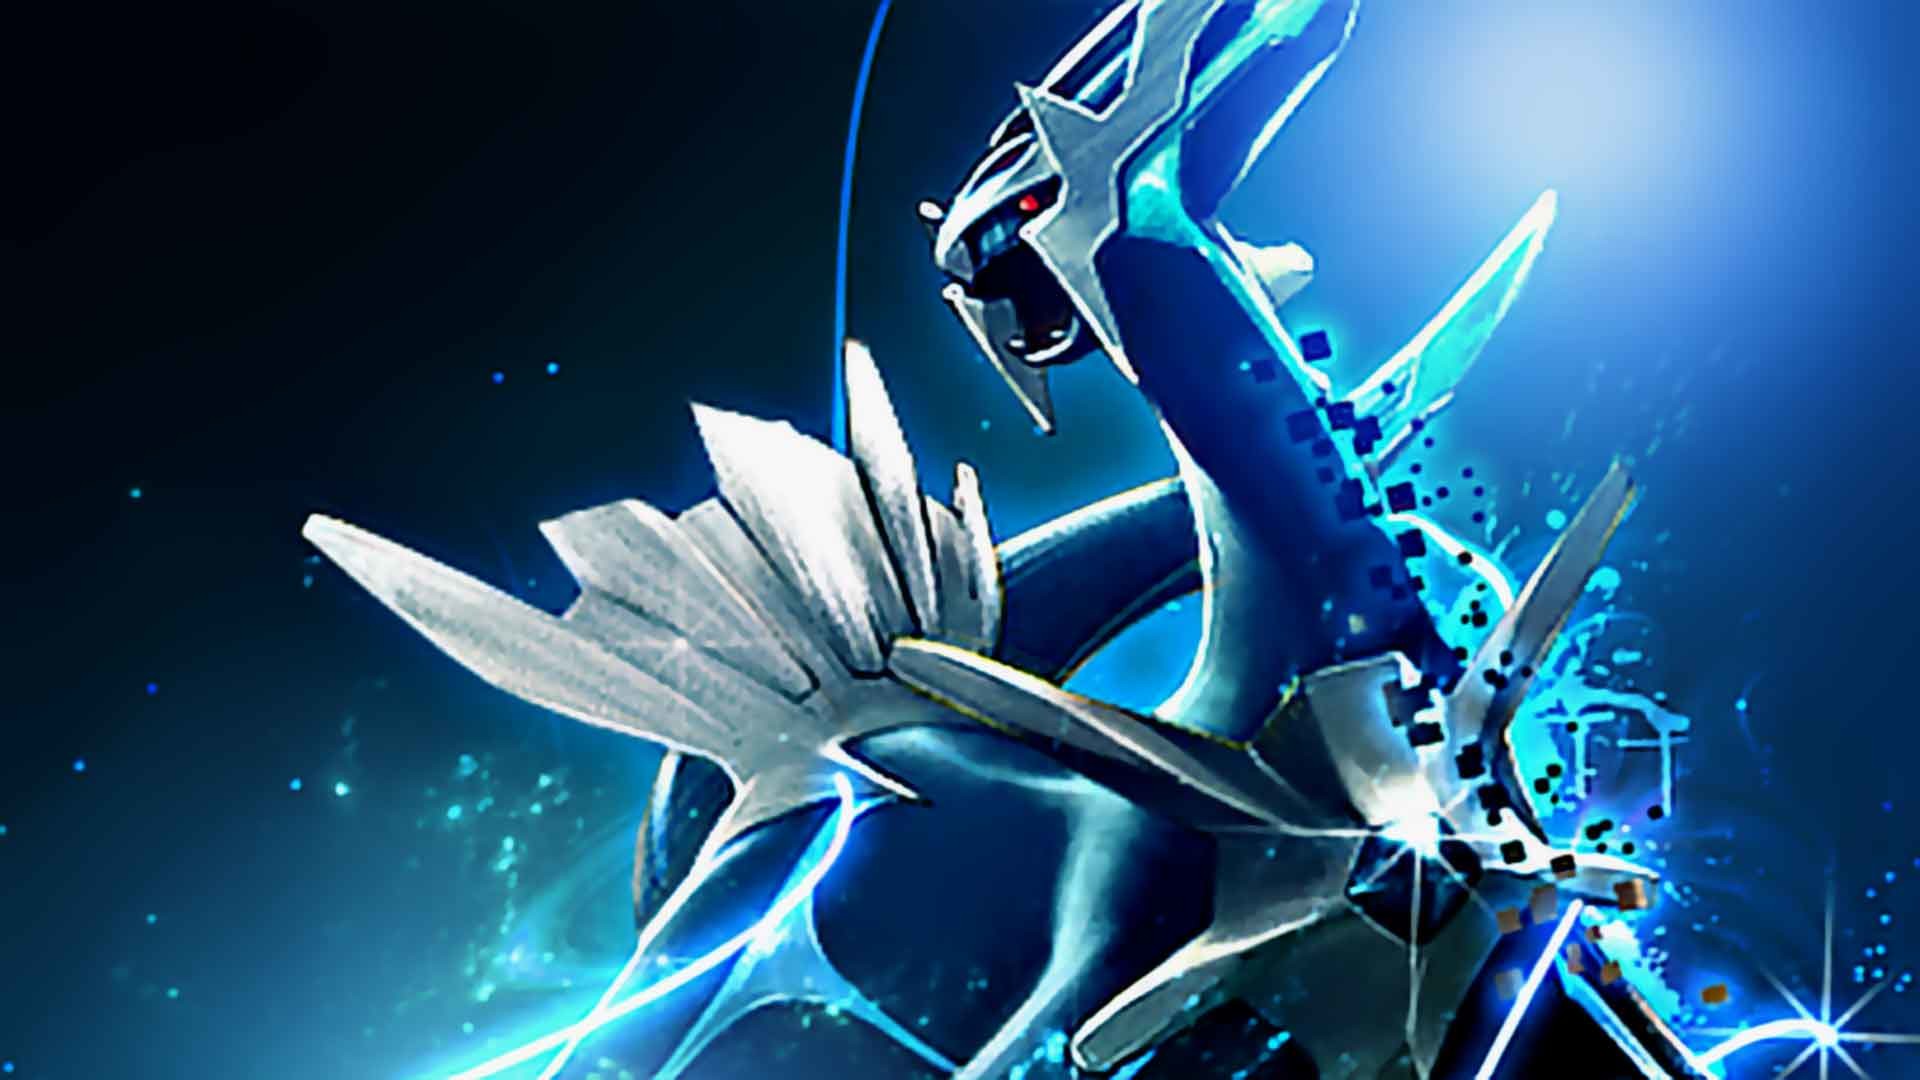 Download Glowing Groudon Kyogre And Rayquaza In Primal Forms Wallpaper   Wallpaperscom